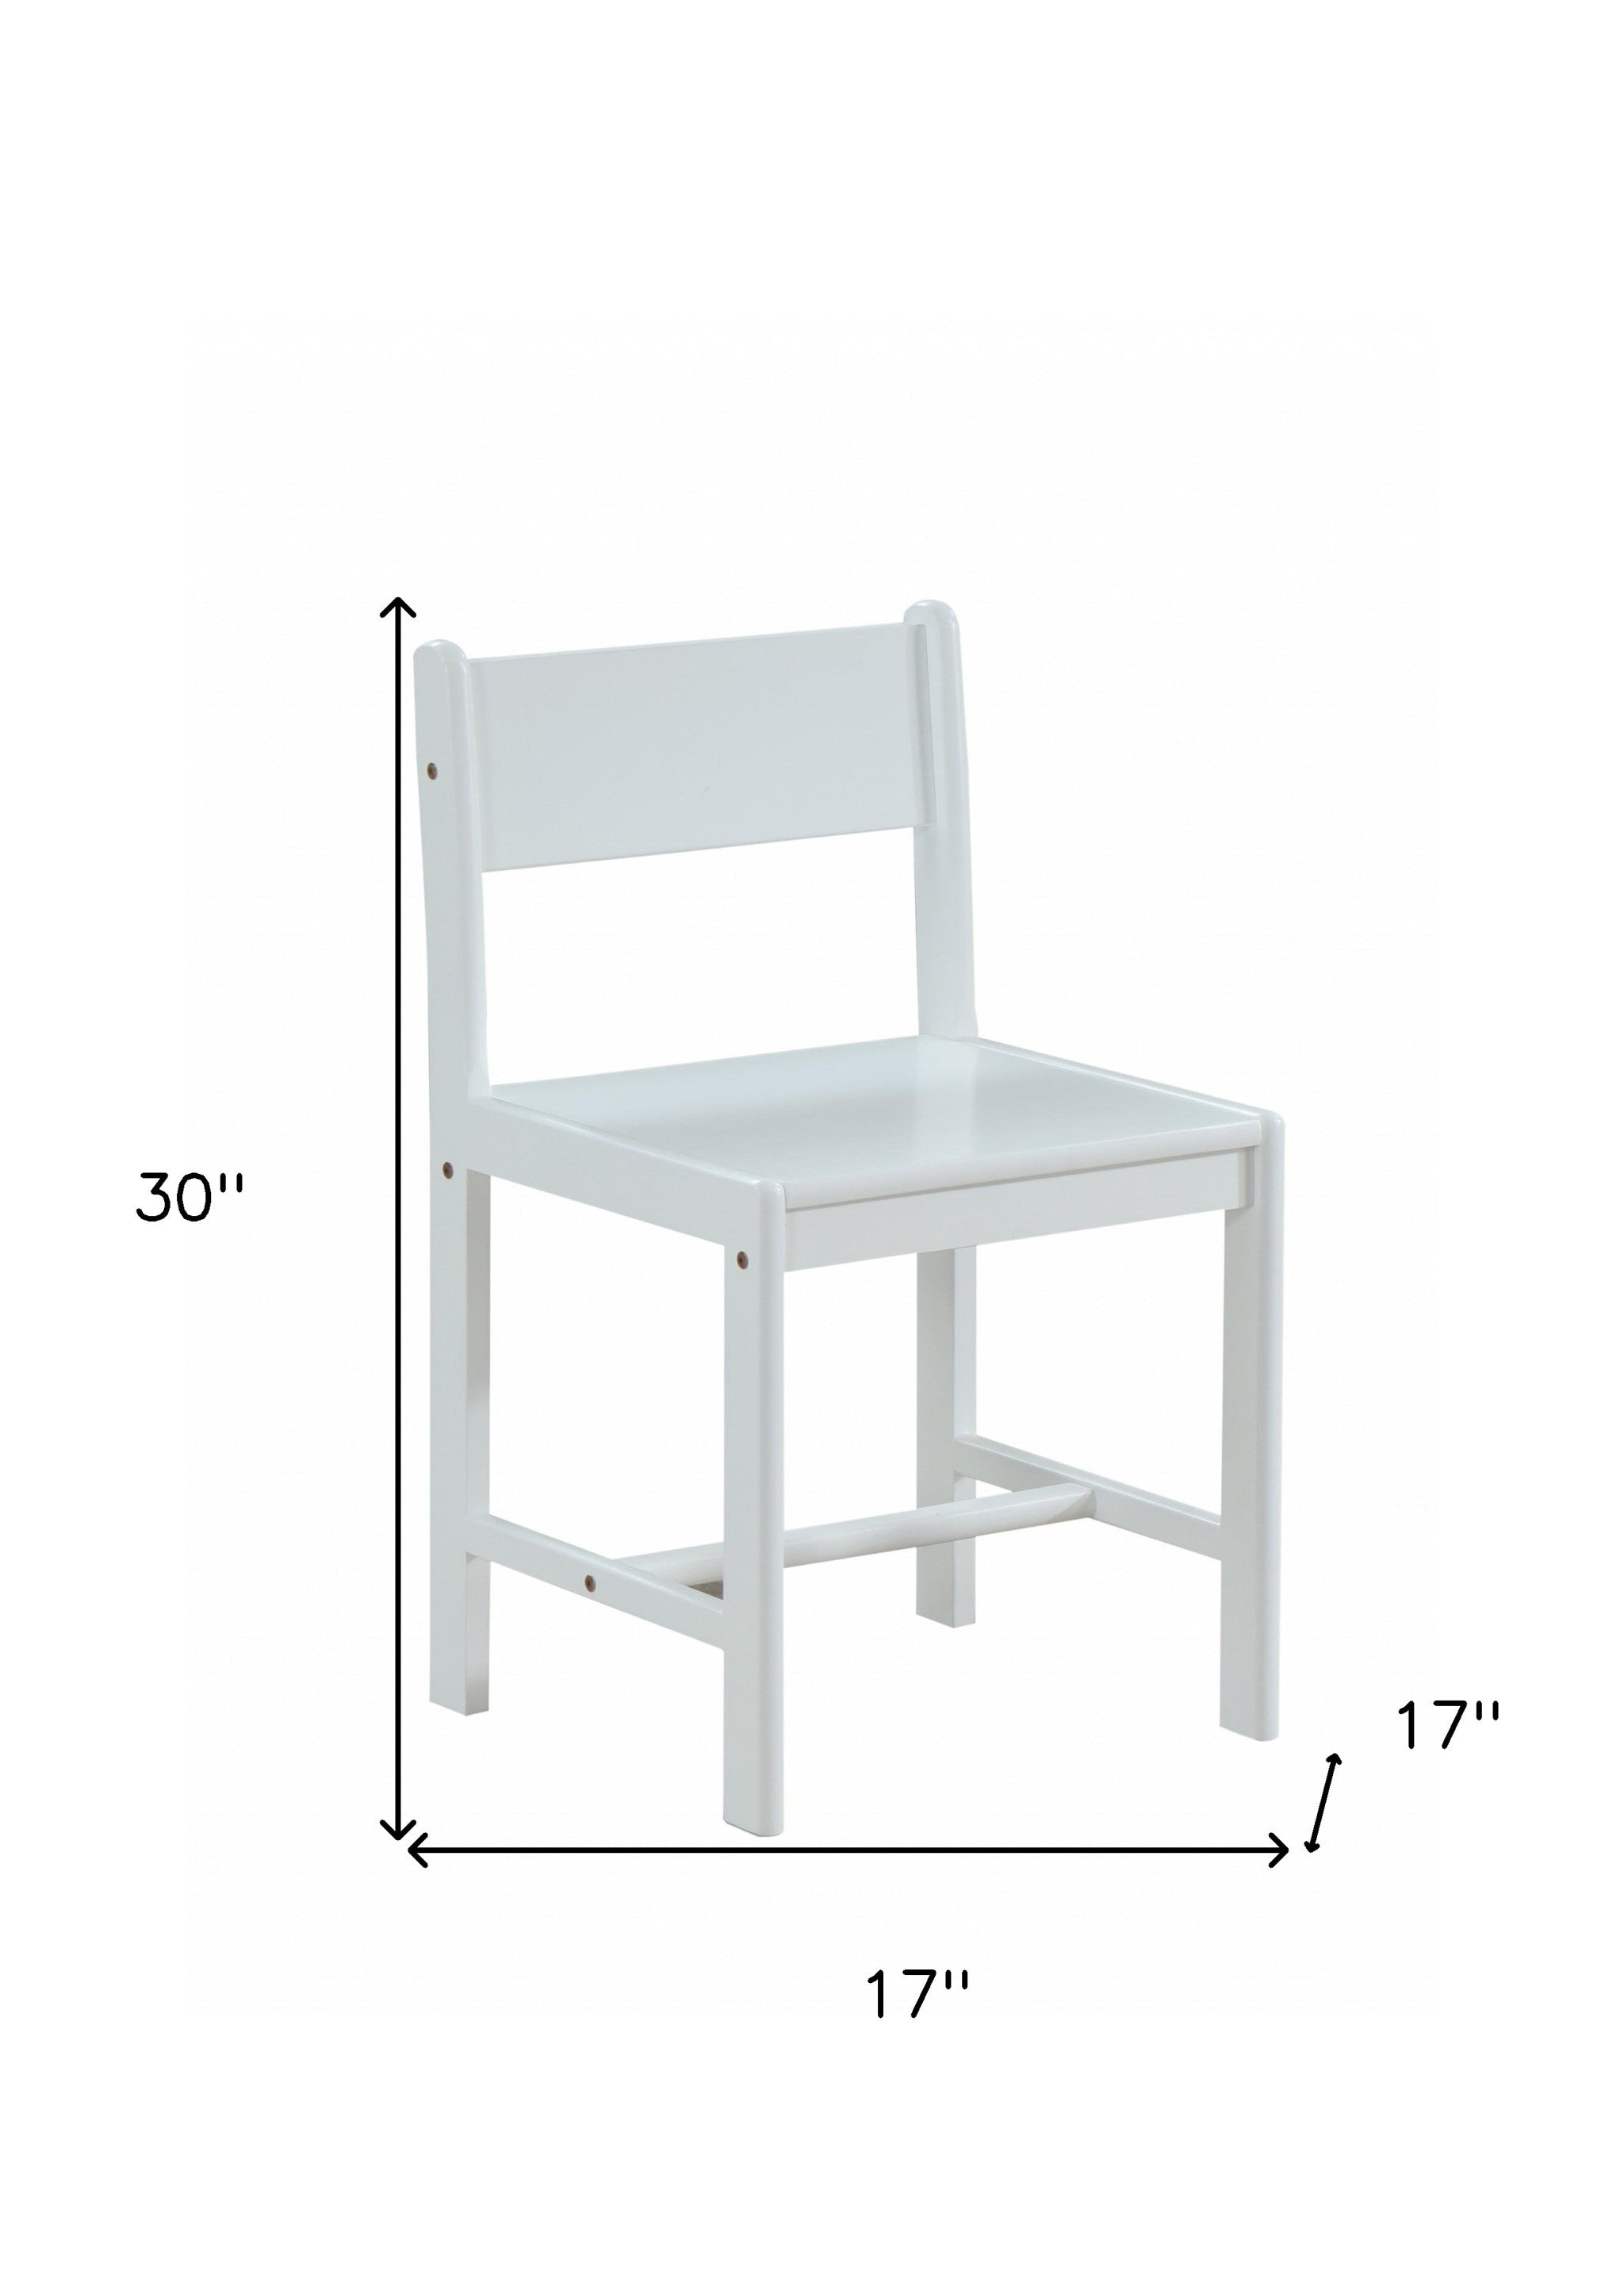 Classic White Wooden Stationary Chair